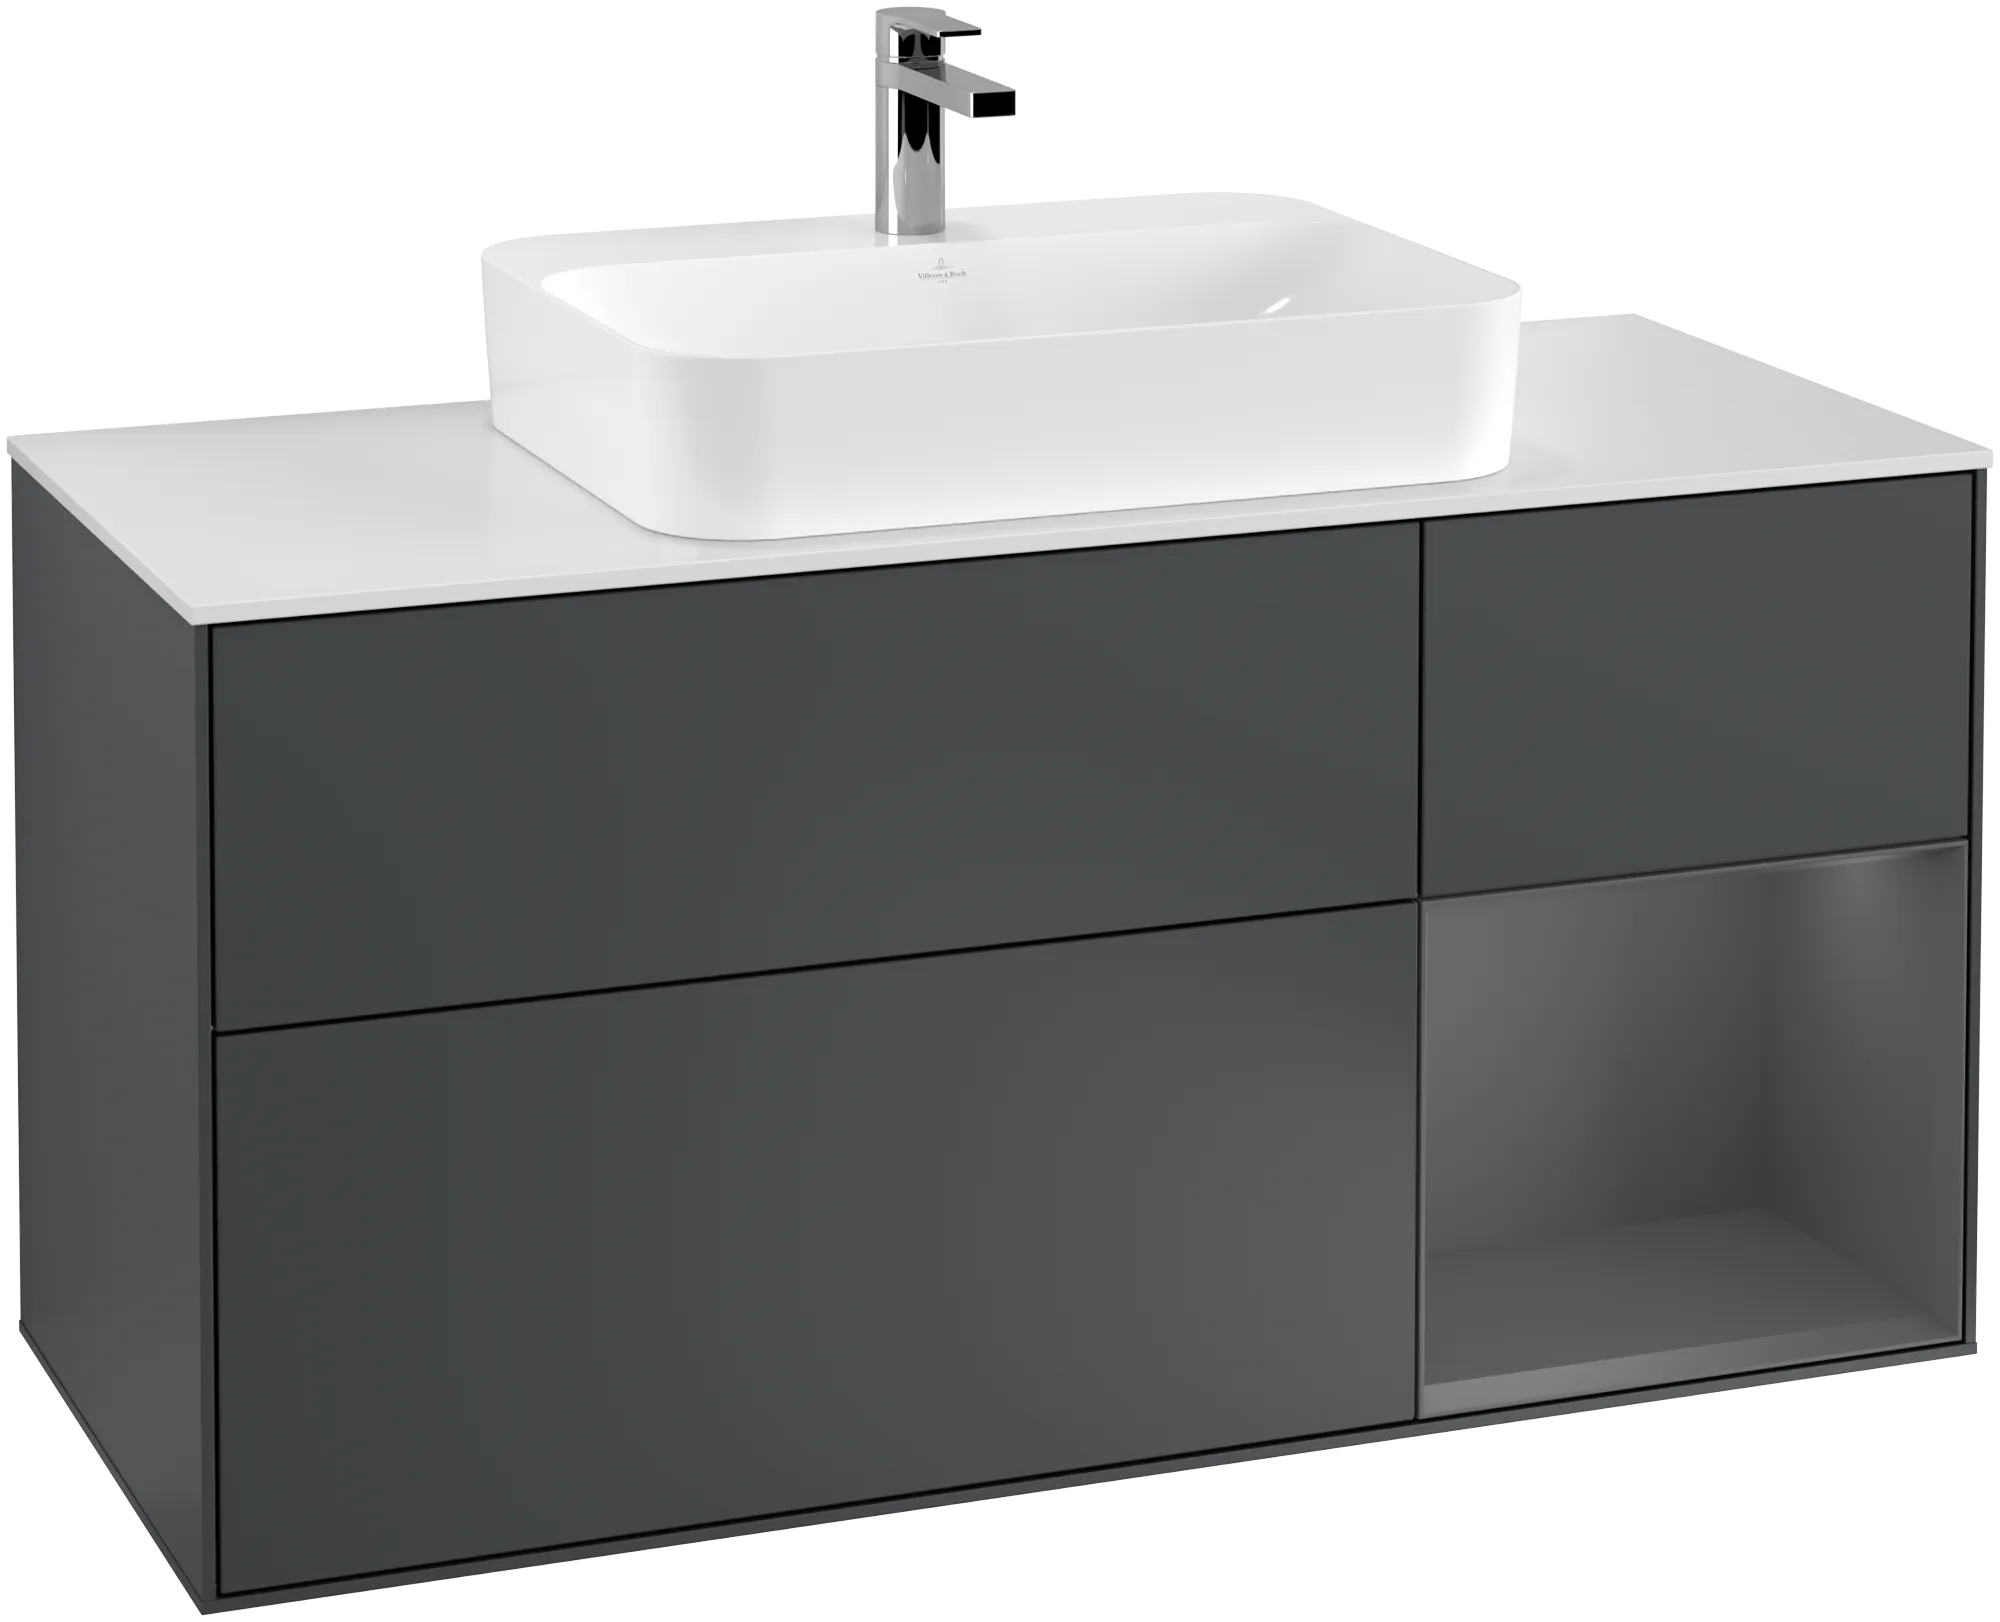 Obrázek VILLEROY BOCH Finion Vanity unit, with lighting, 3 pull-out compartments, 1200 x 603 x 501 mm, Midnight Blue Matt Lacquer / Anthracite Matt Lacquer / Glass White Matt #G421GKHG